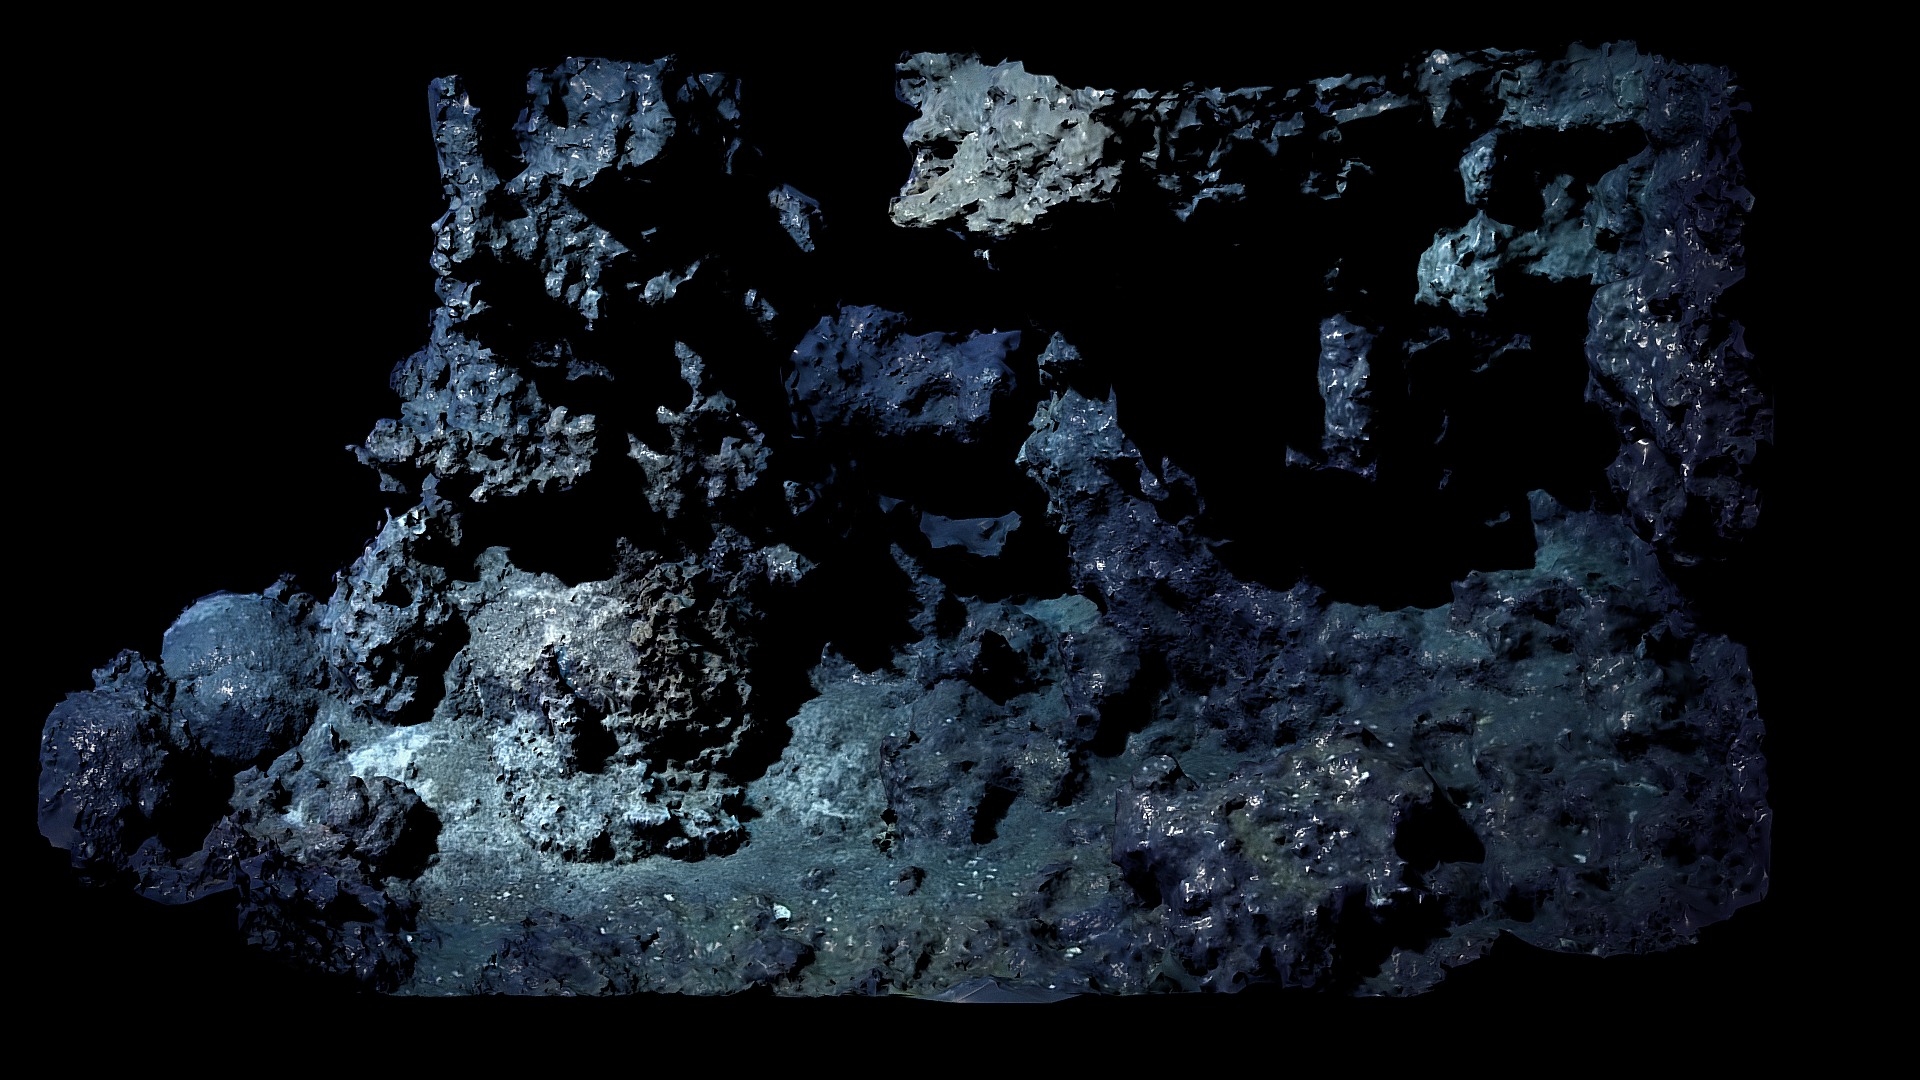 3D model Low Poly Deep Sea Hydrothermal Vent #9 - This is a 3D model of the Low Poly Deep Sea Hydrothermal Vent #9. The 3D model is about a close-up of a rock.